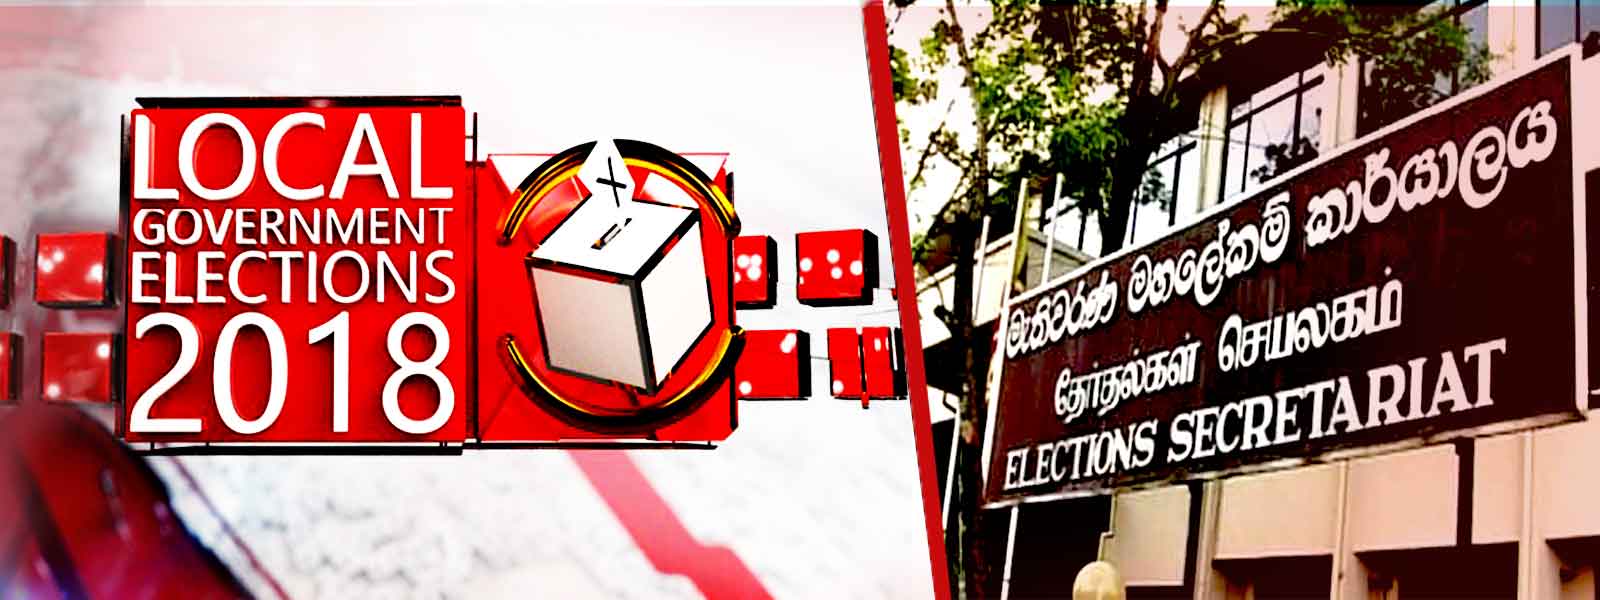 LG elections: Voting concludes